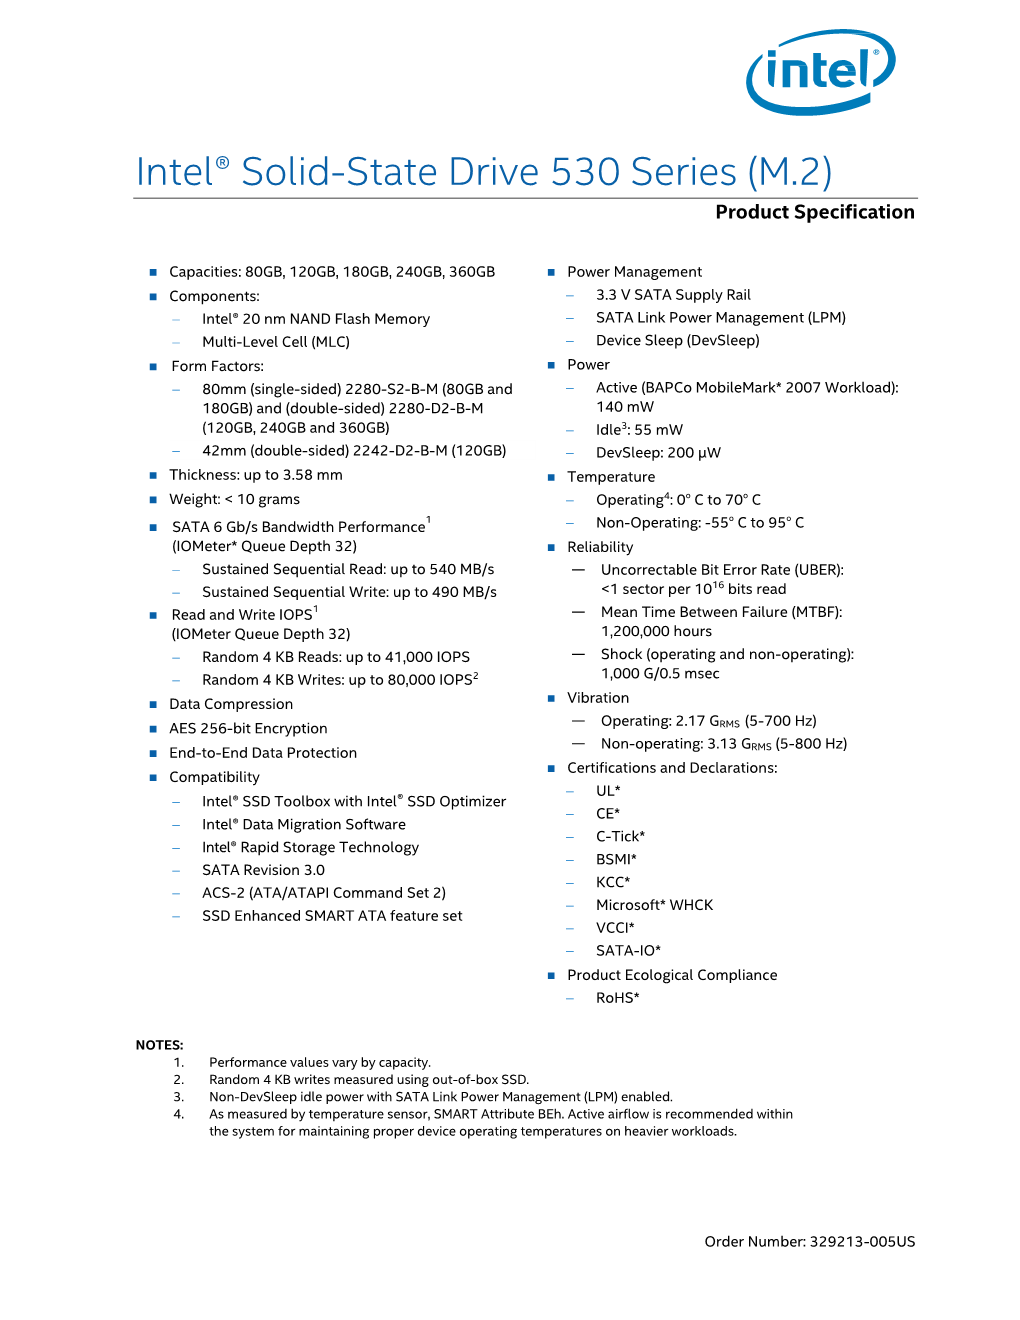 Intel® Solid-State Drive 530 Series (M.2) Product Specification